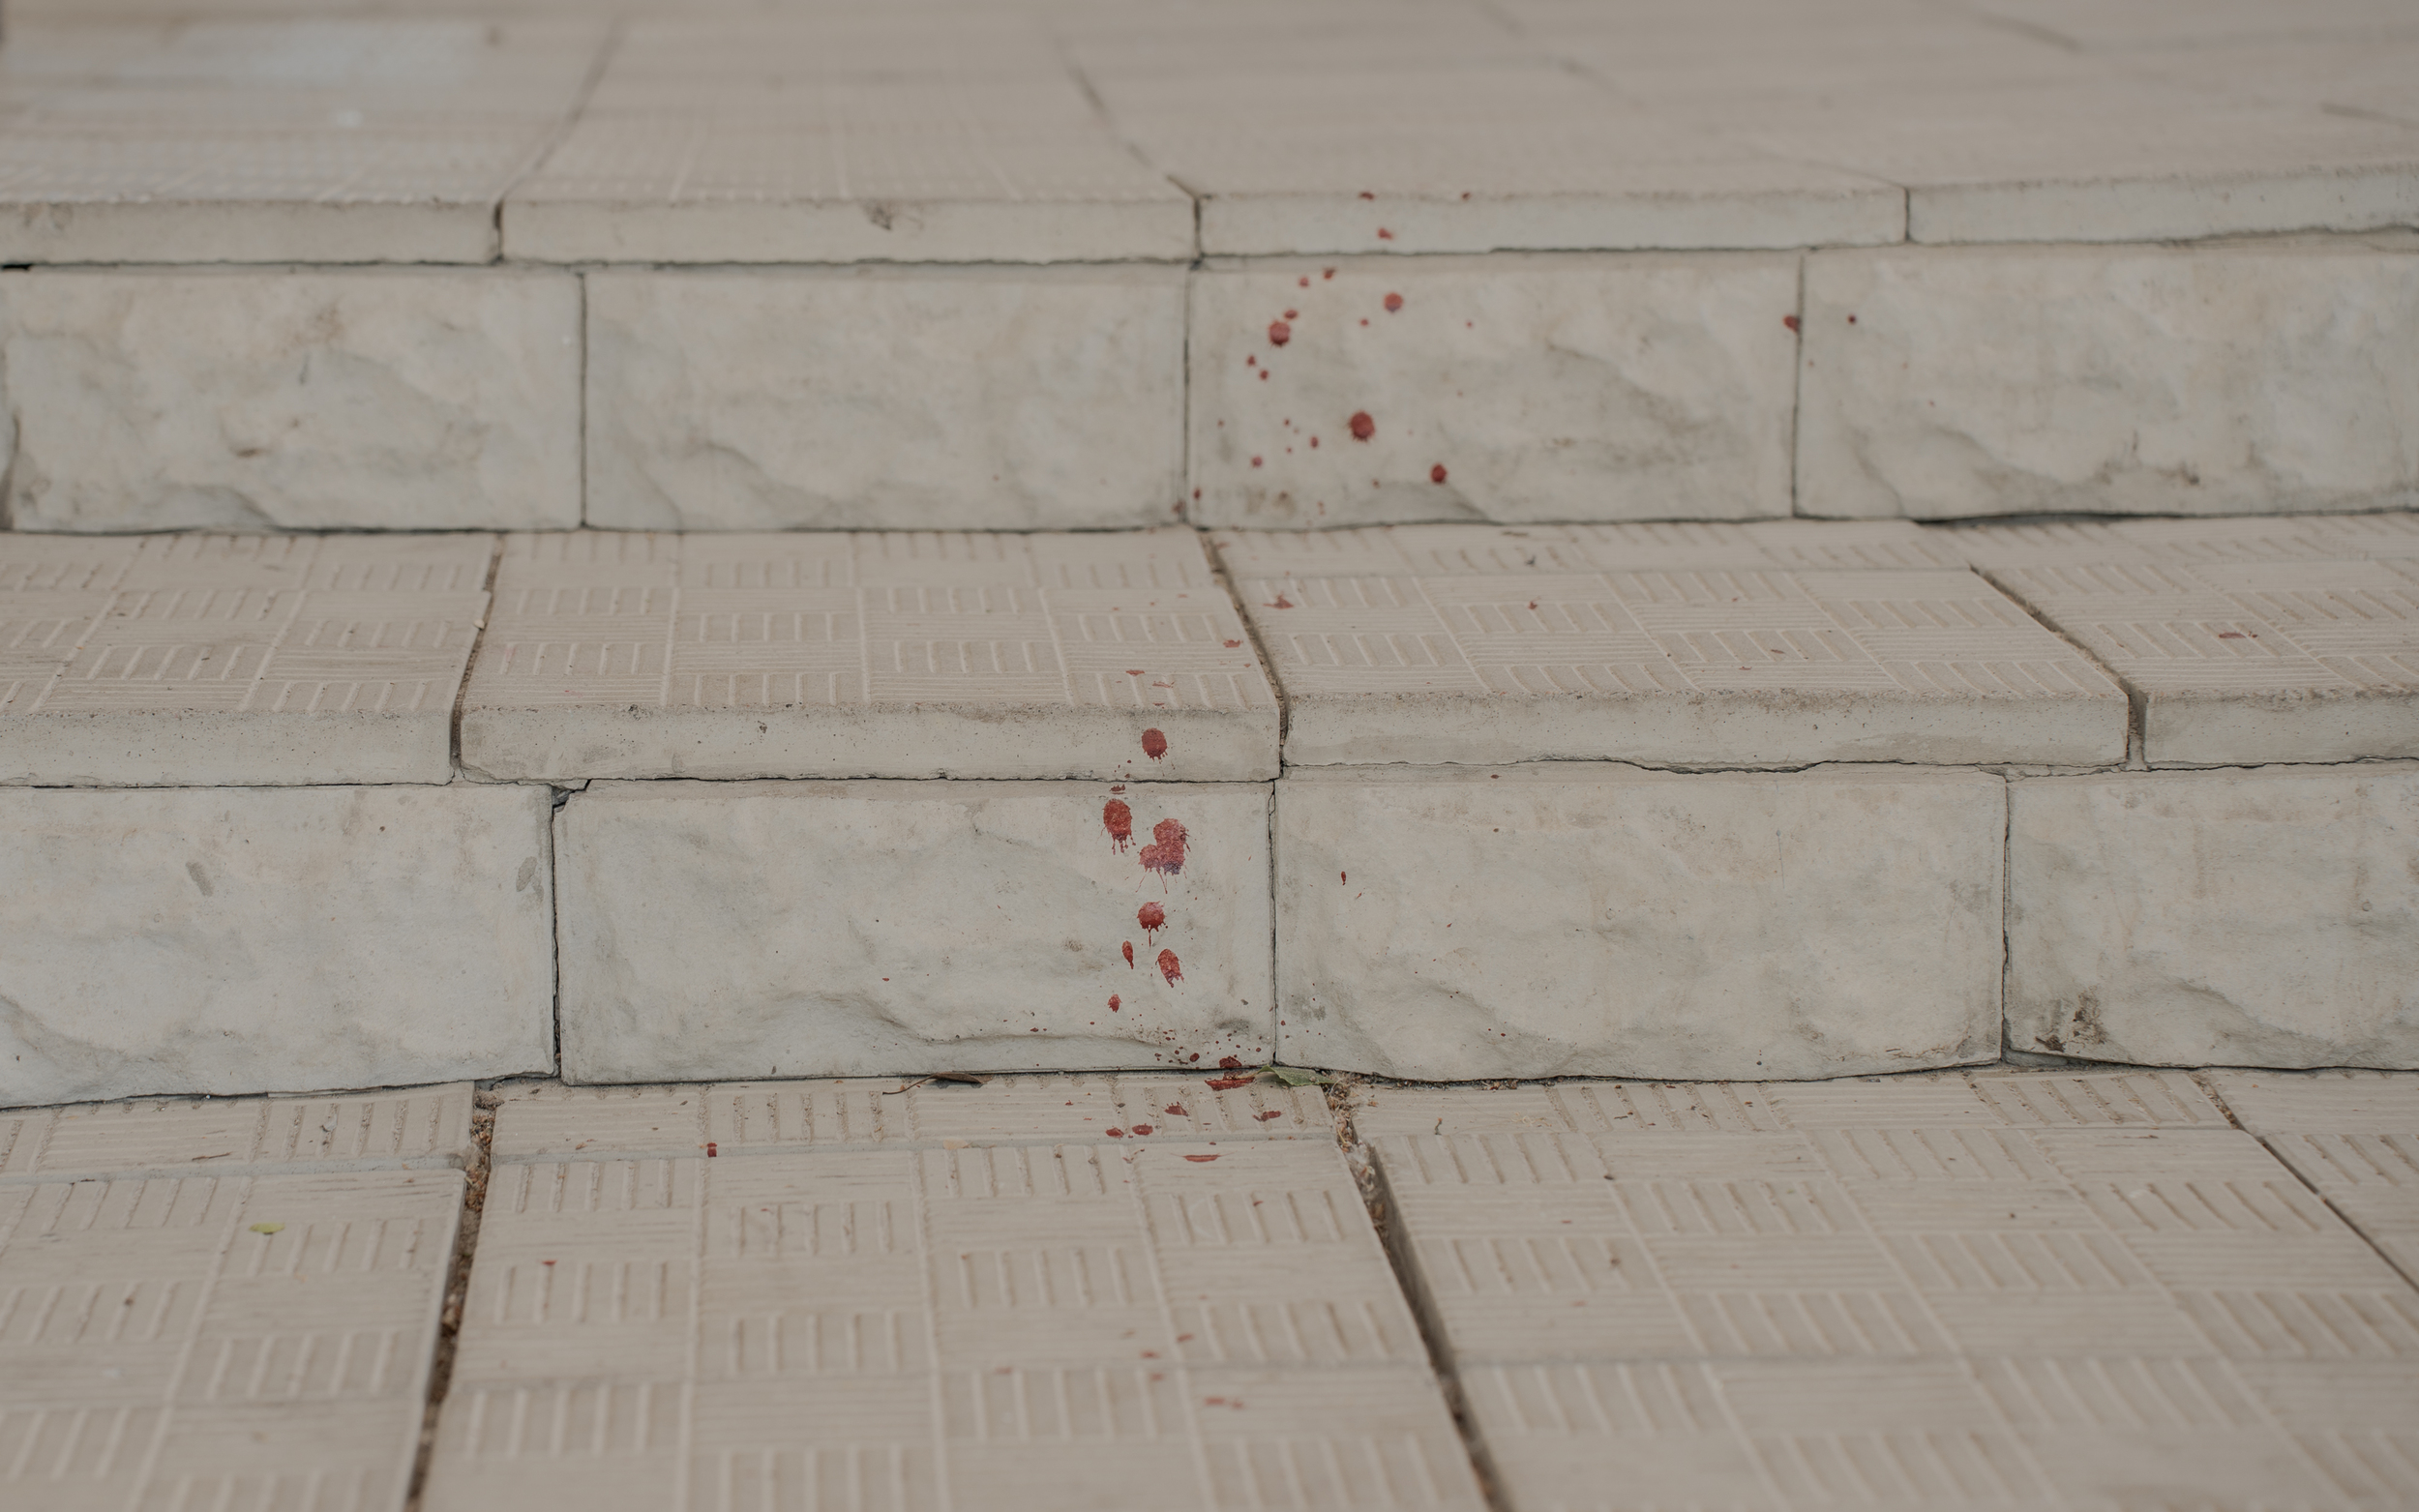 Blood on the stairs to the school. Russia strike the school's stadium in Kharkiv on May 8, injuring seven, including four children